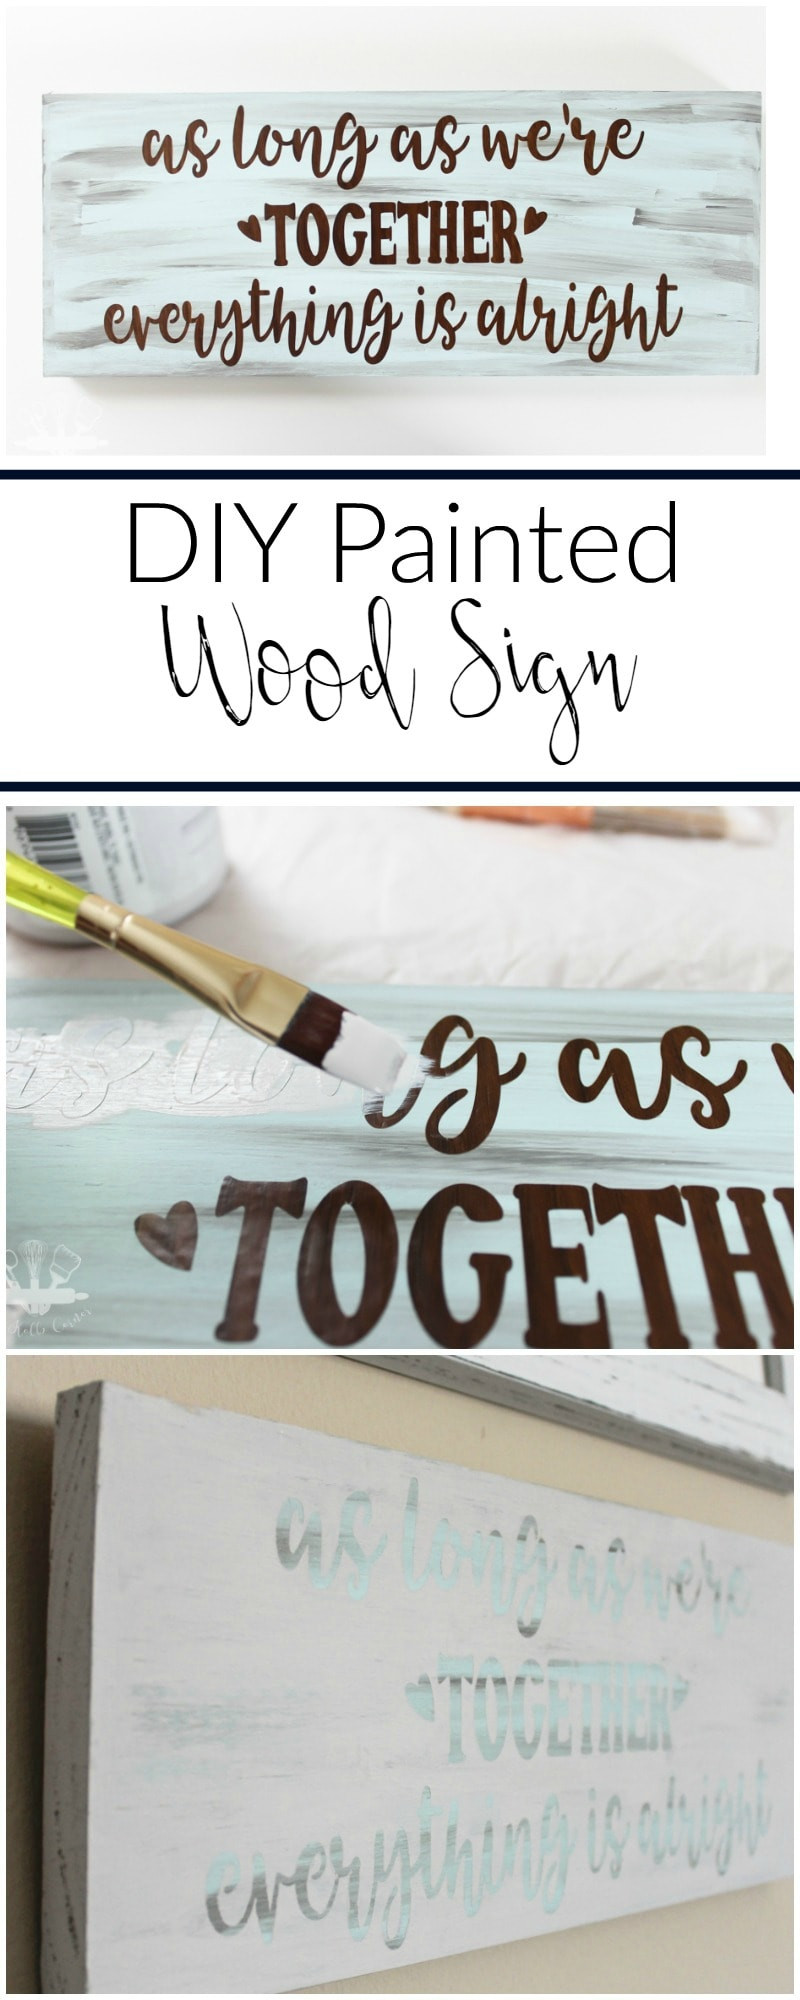 DIY Painted Wooden Signs
 DIY Painted Wood Sign